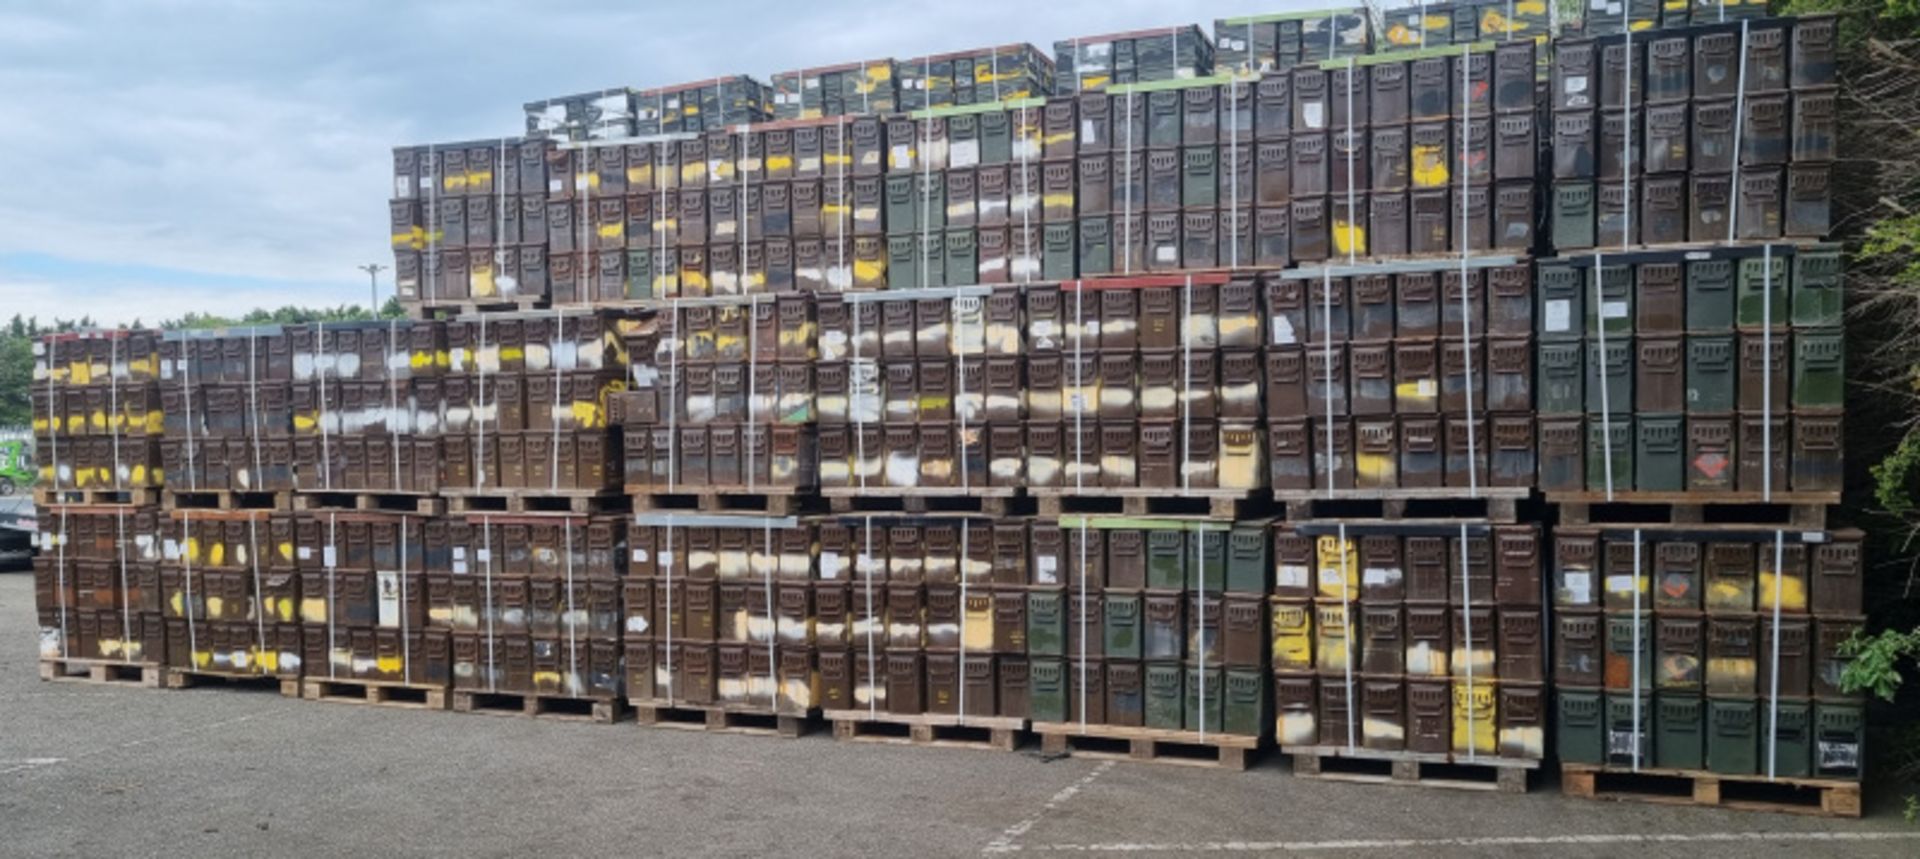 1x Pallet of M548 ammo containers - total quantity 36 - Image 12 of 12